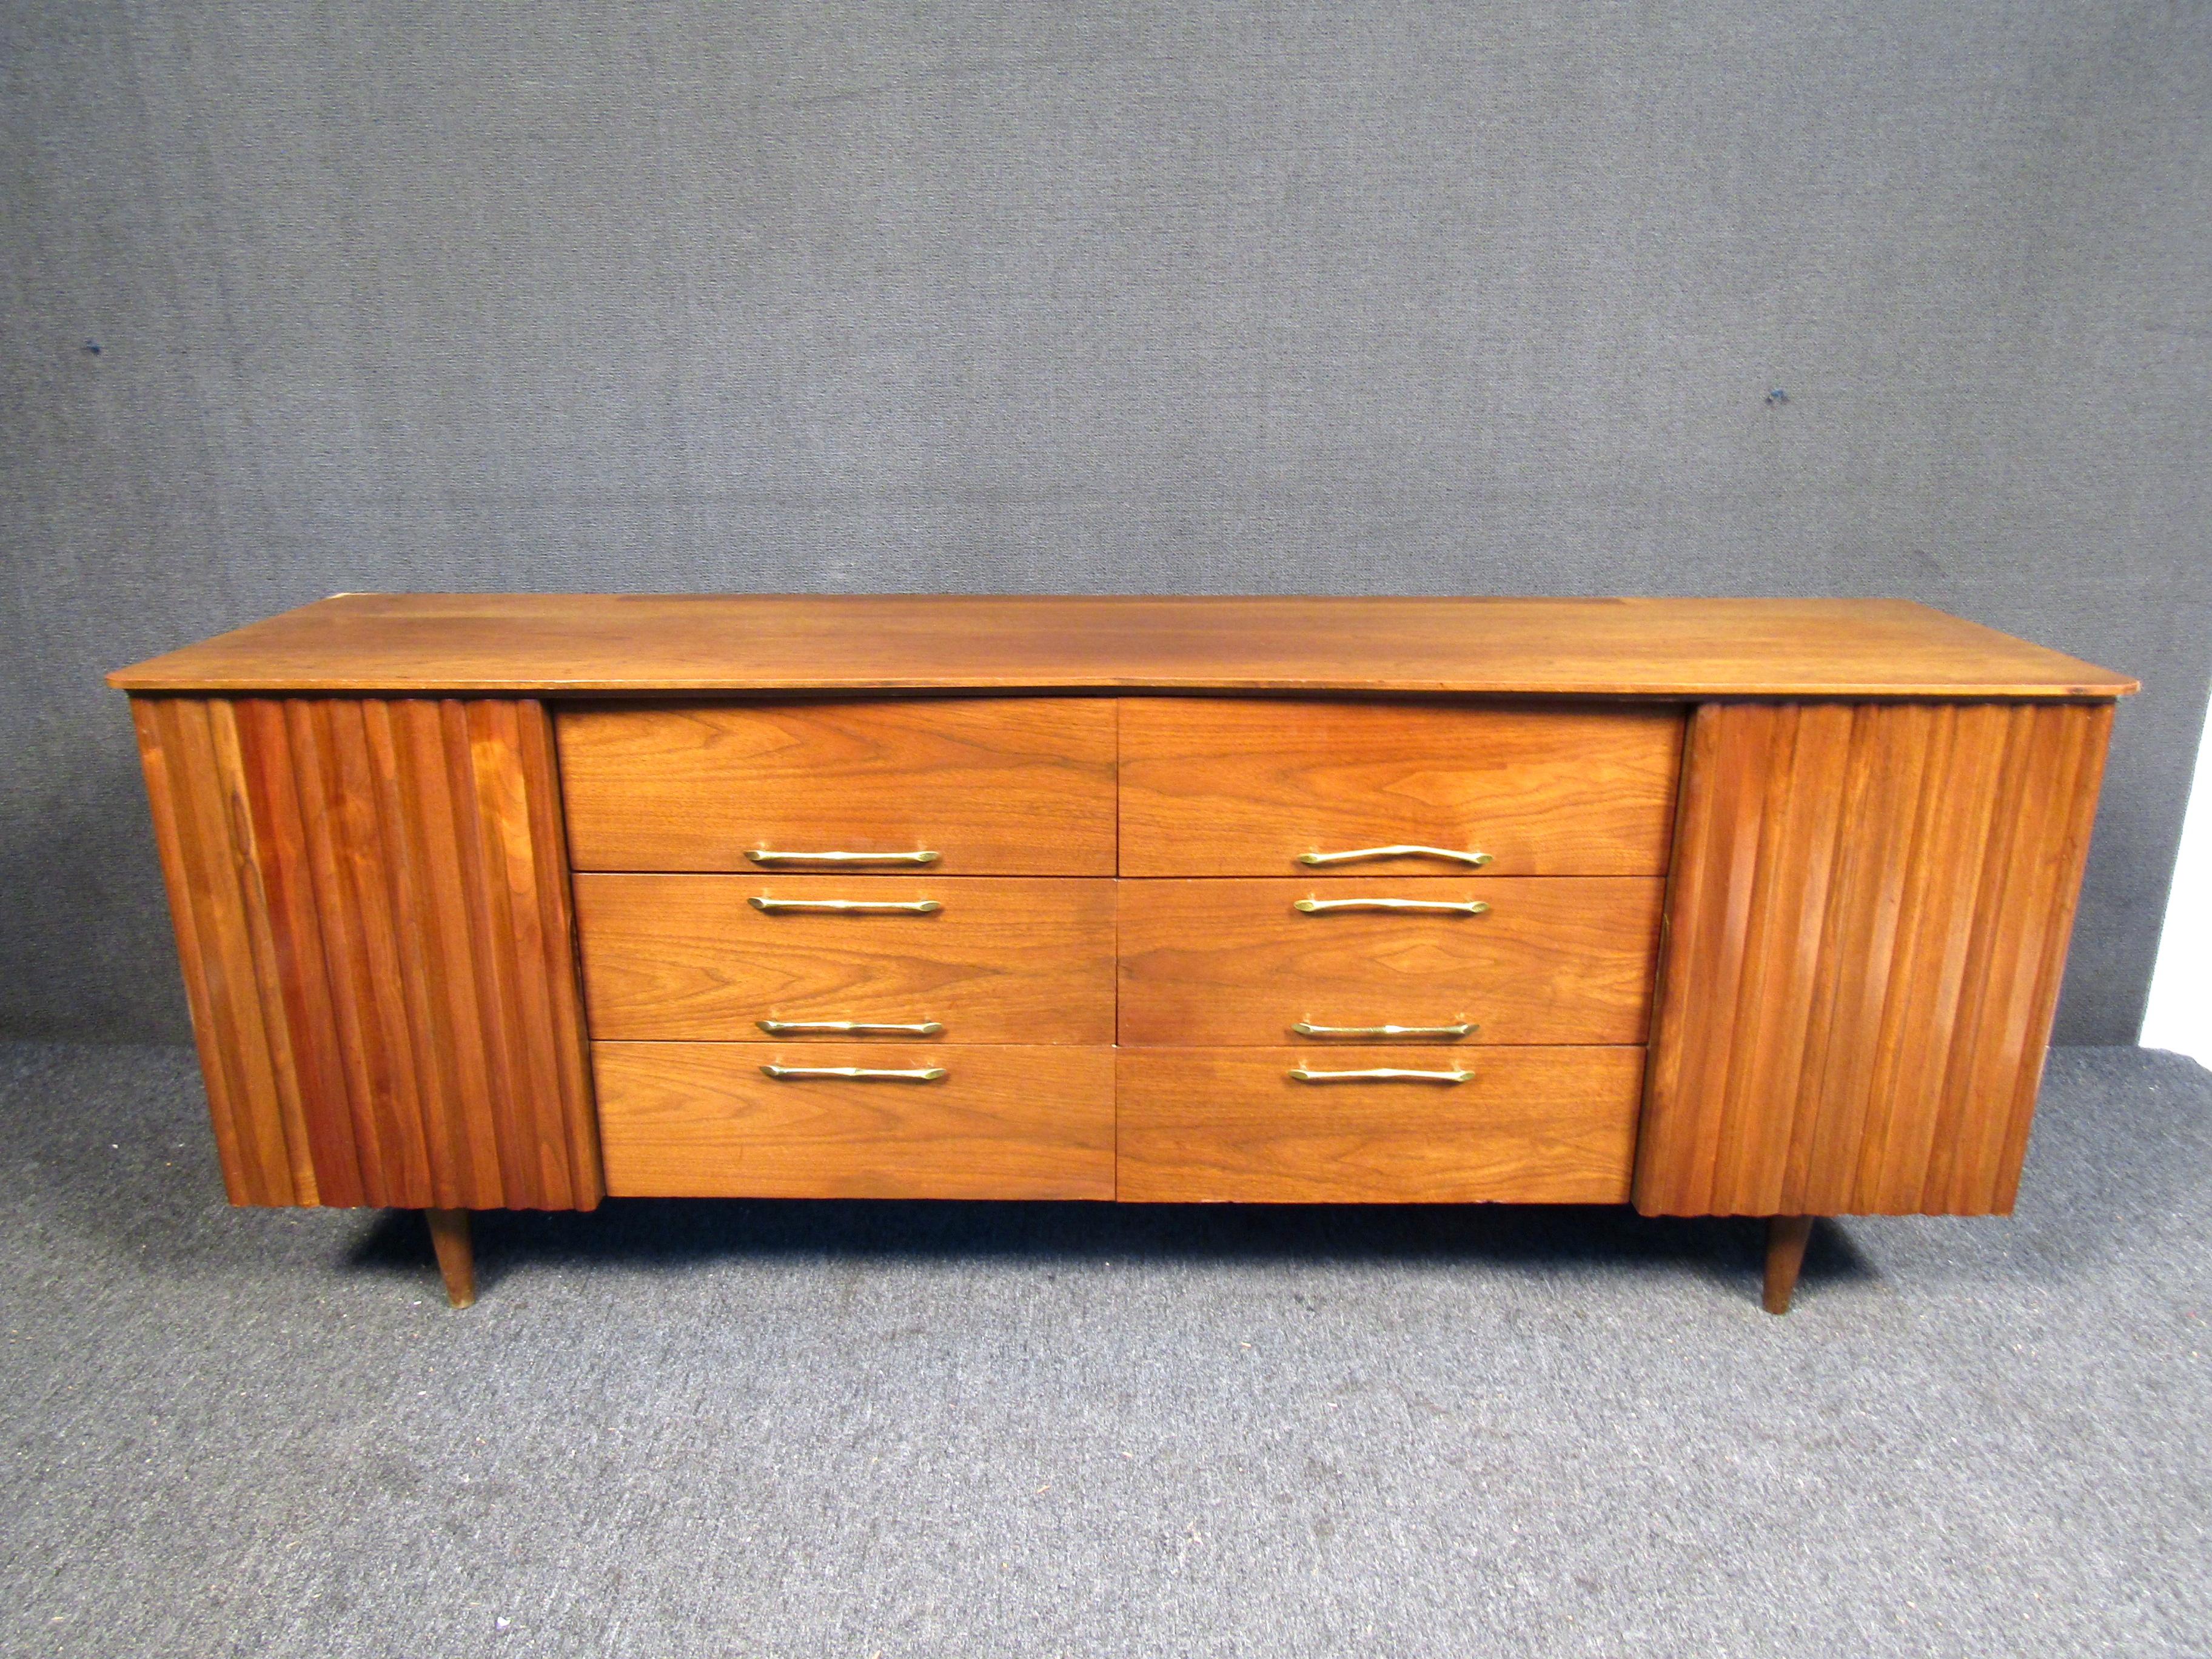 This odd walnut credenza features twelve drawers with doors that cover three per side, it also has sleek brass handles that add pop to the overall beauty of the piece. Please confirm item location (NJ or NY).